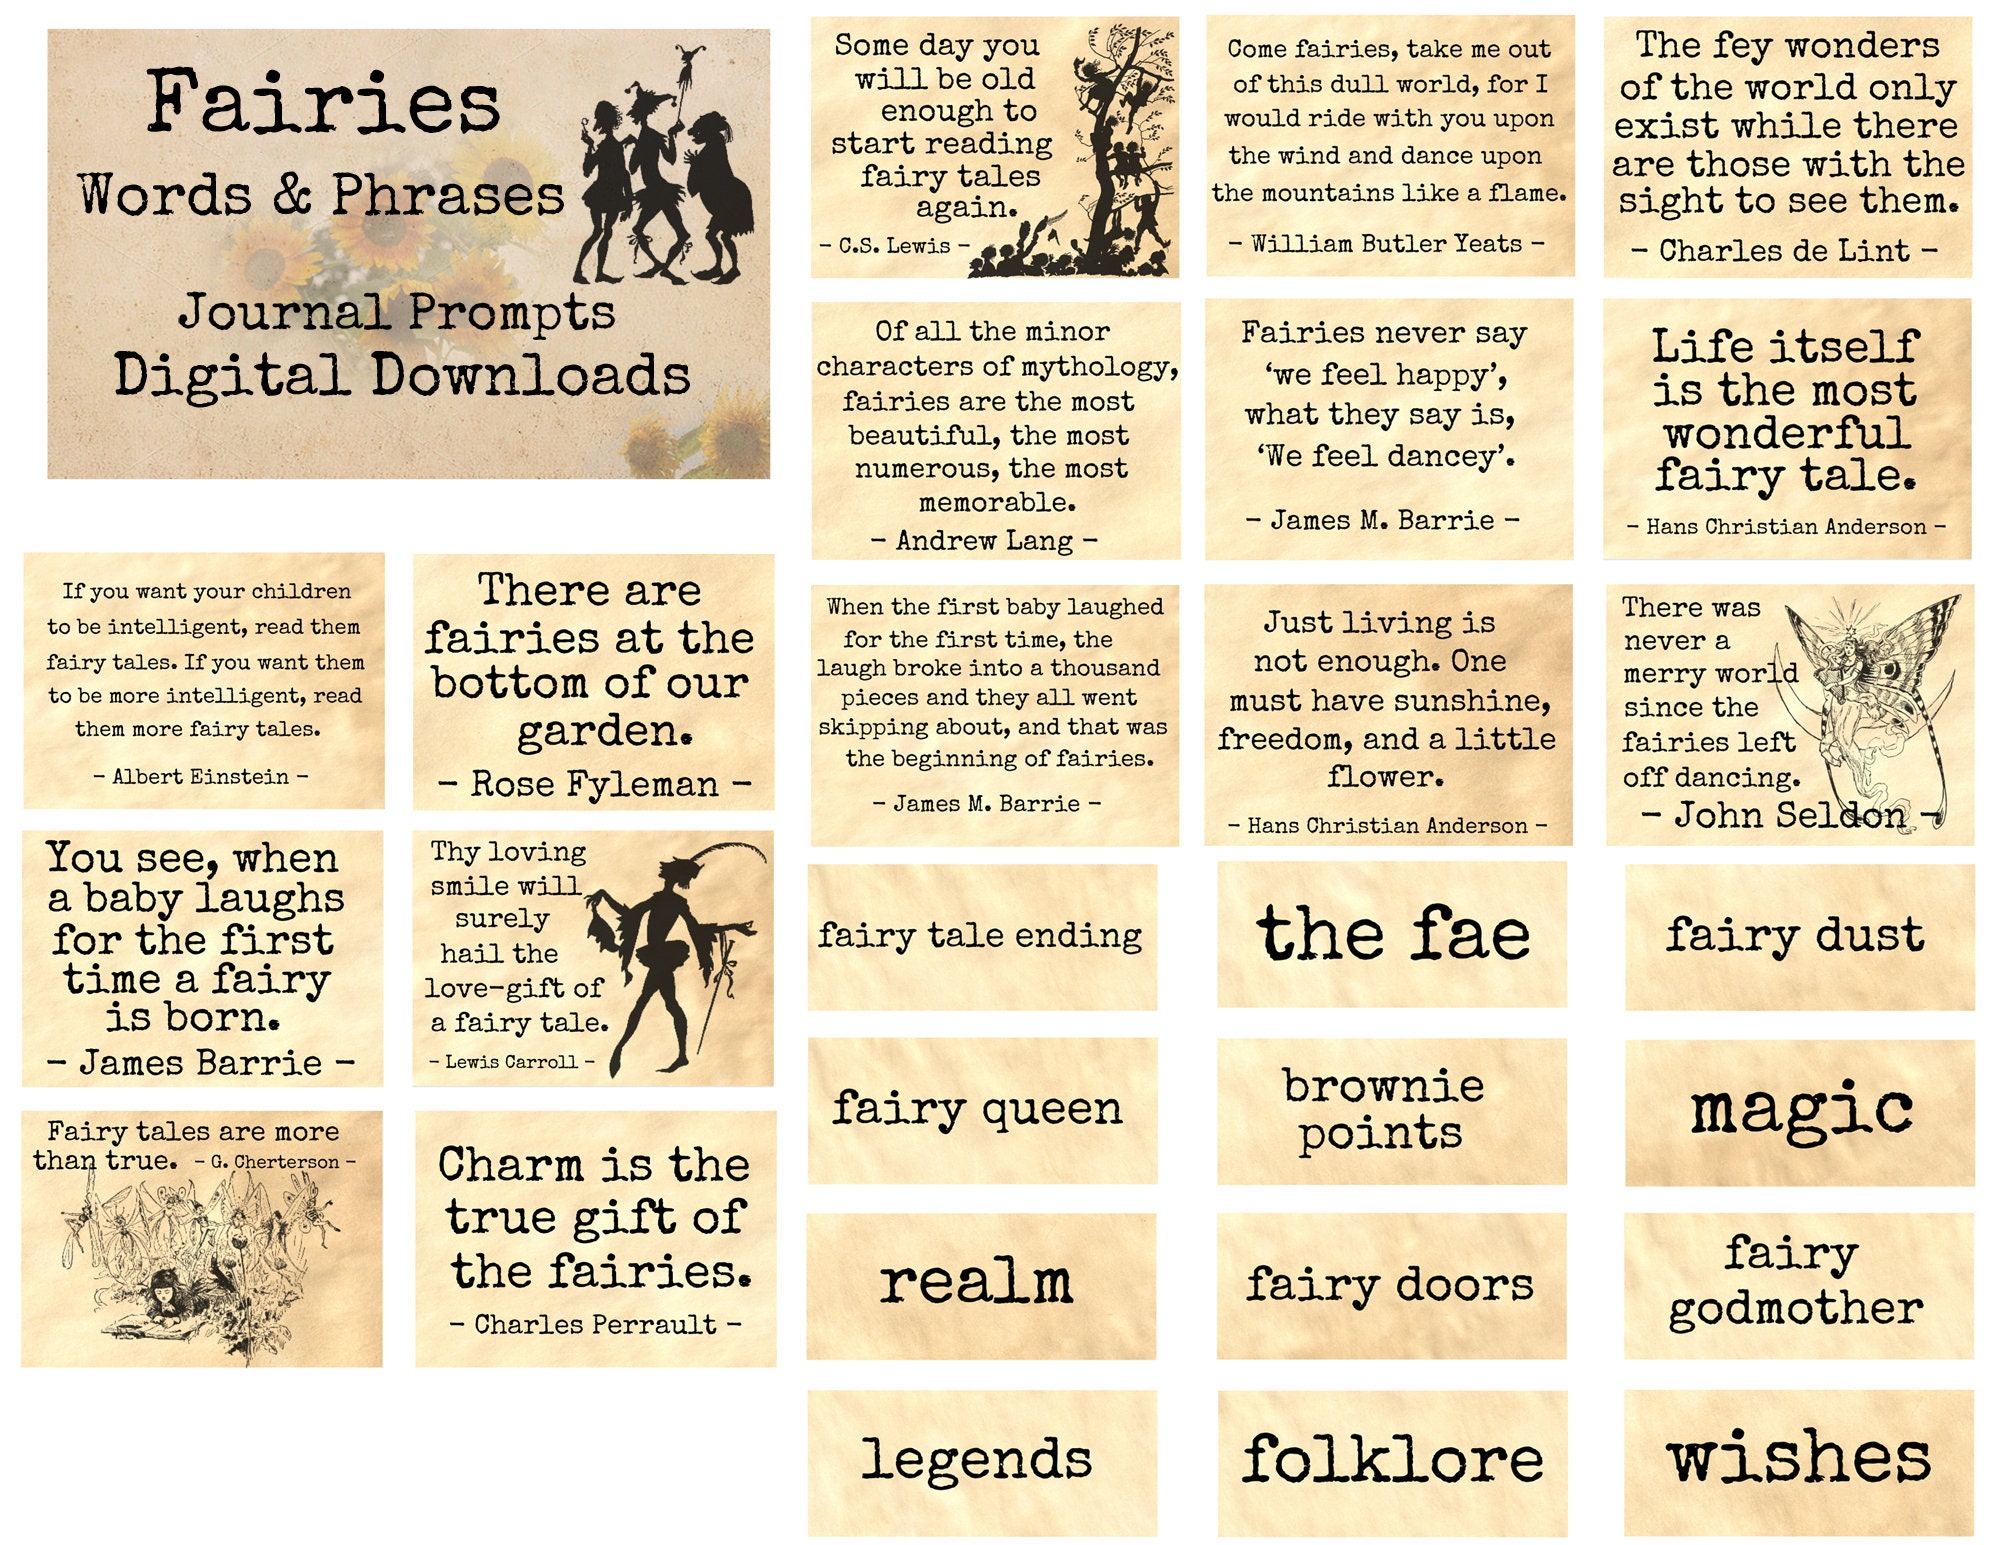 DING-TOES - WORDS AND PHRASES FROM THE PAST